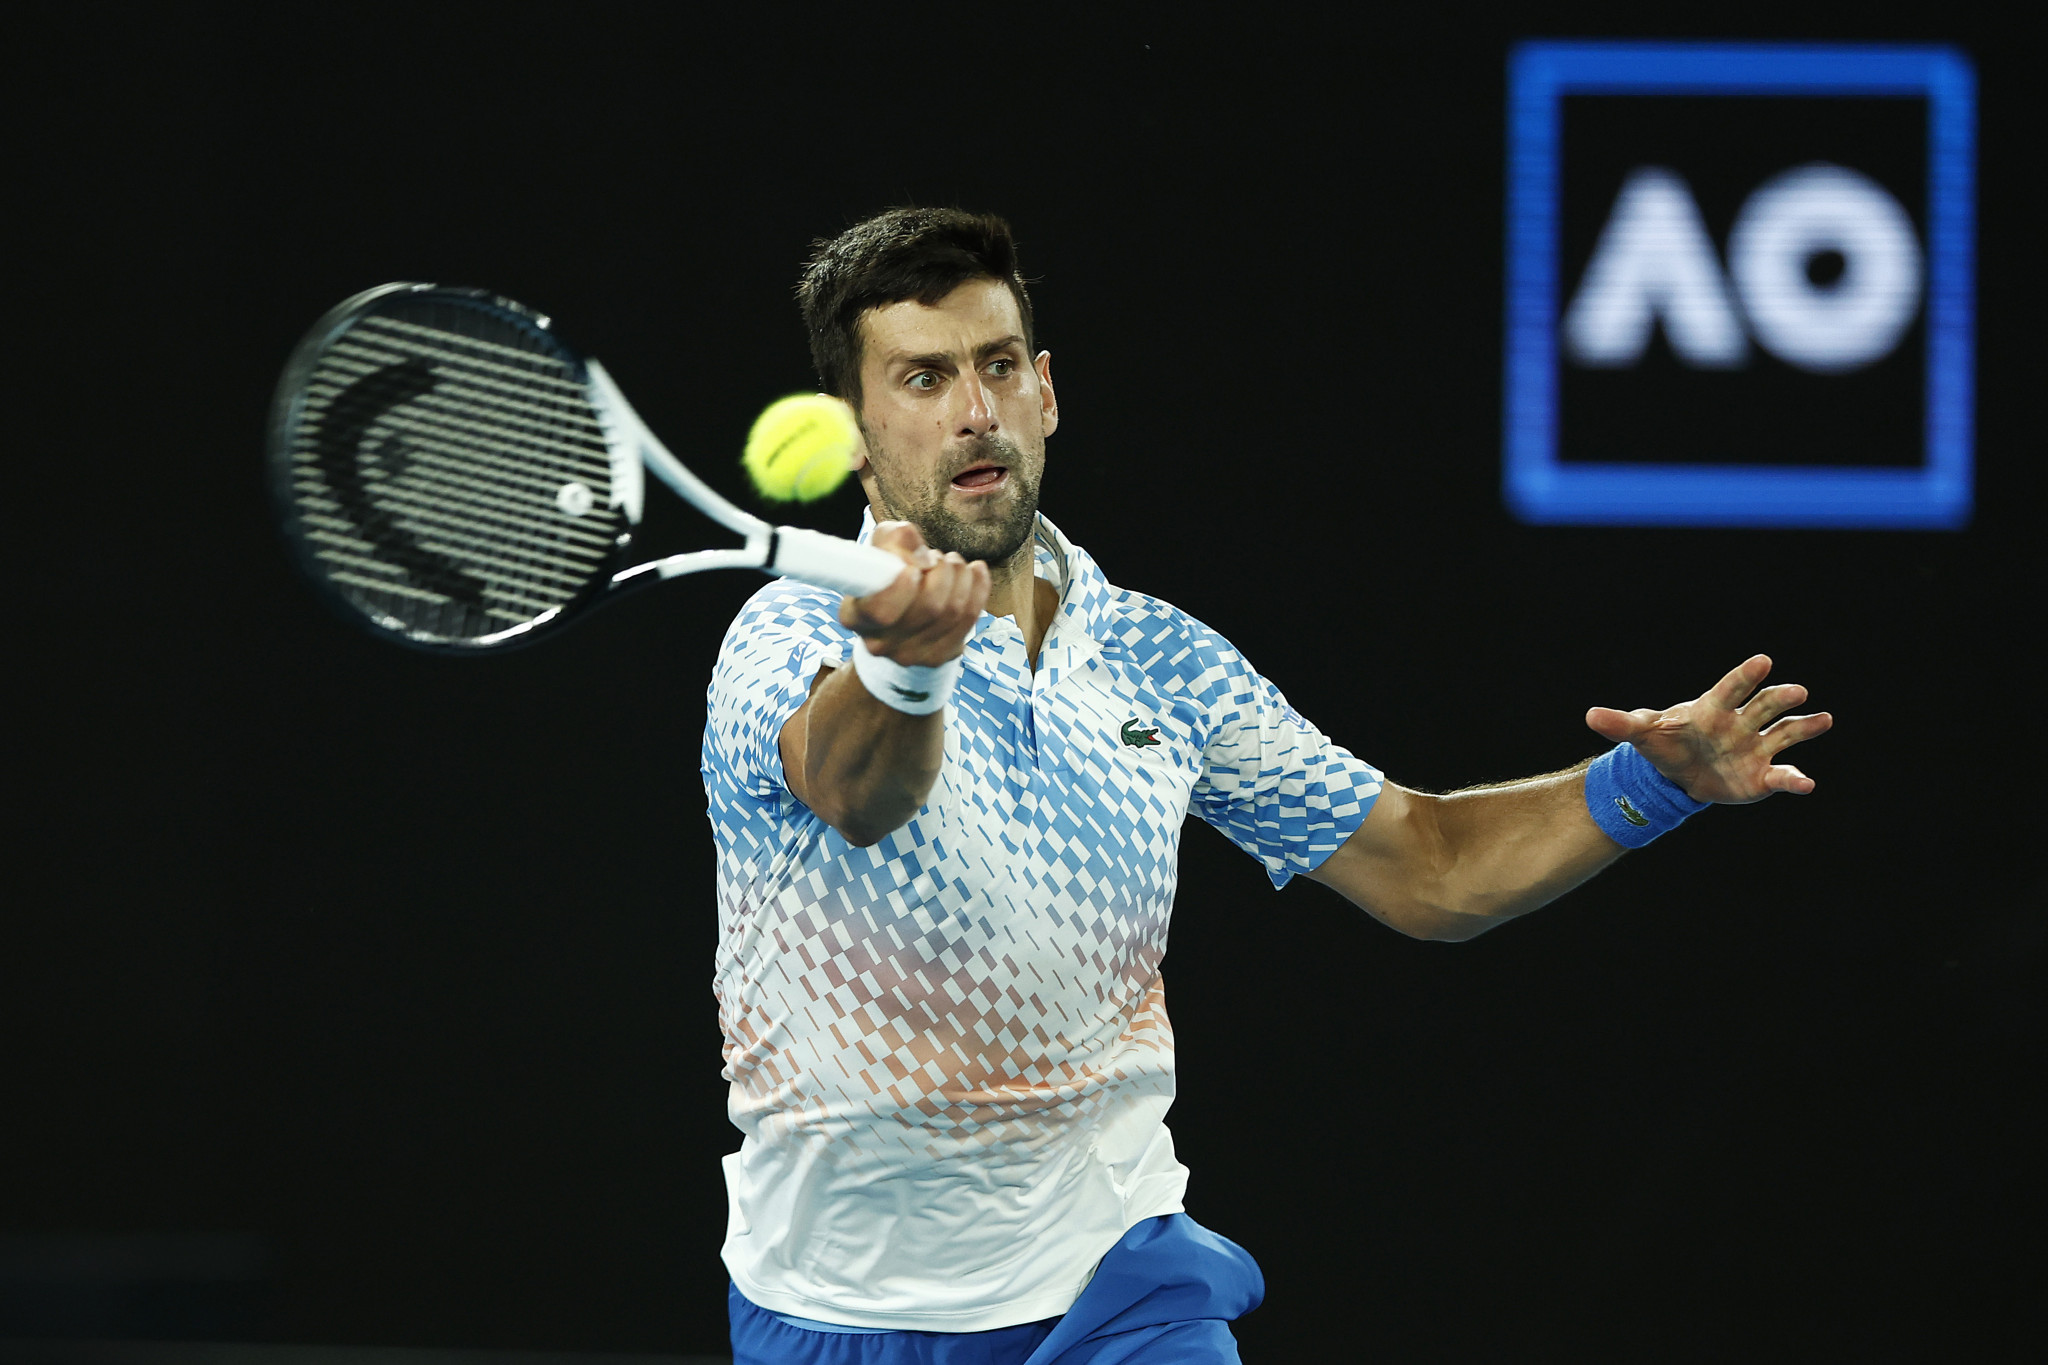 Serbia's Novak Djokovic was also critical of the umpire not giving warning to heckling fans during his match against Russia's Andrey Rublev in the Australian Open quarter-final ©Getty Images